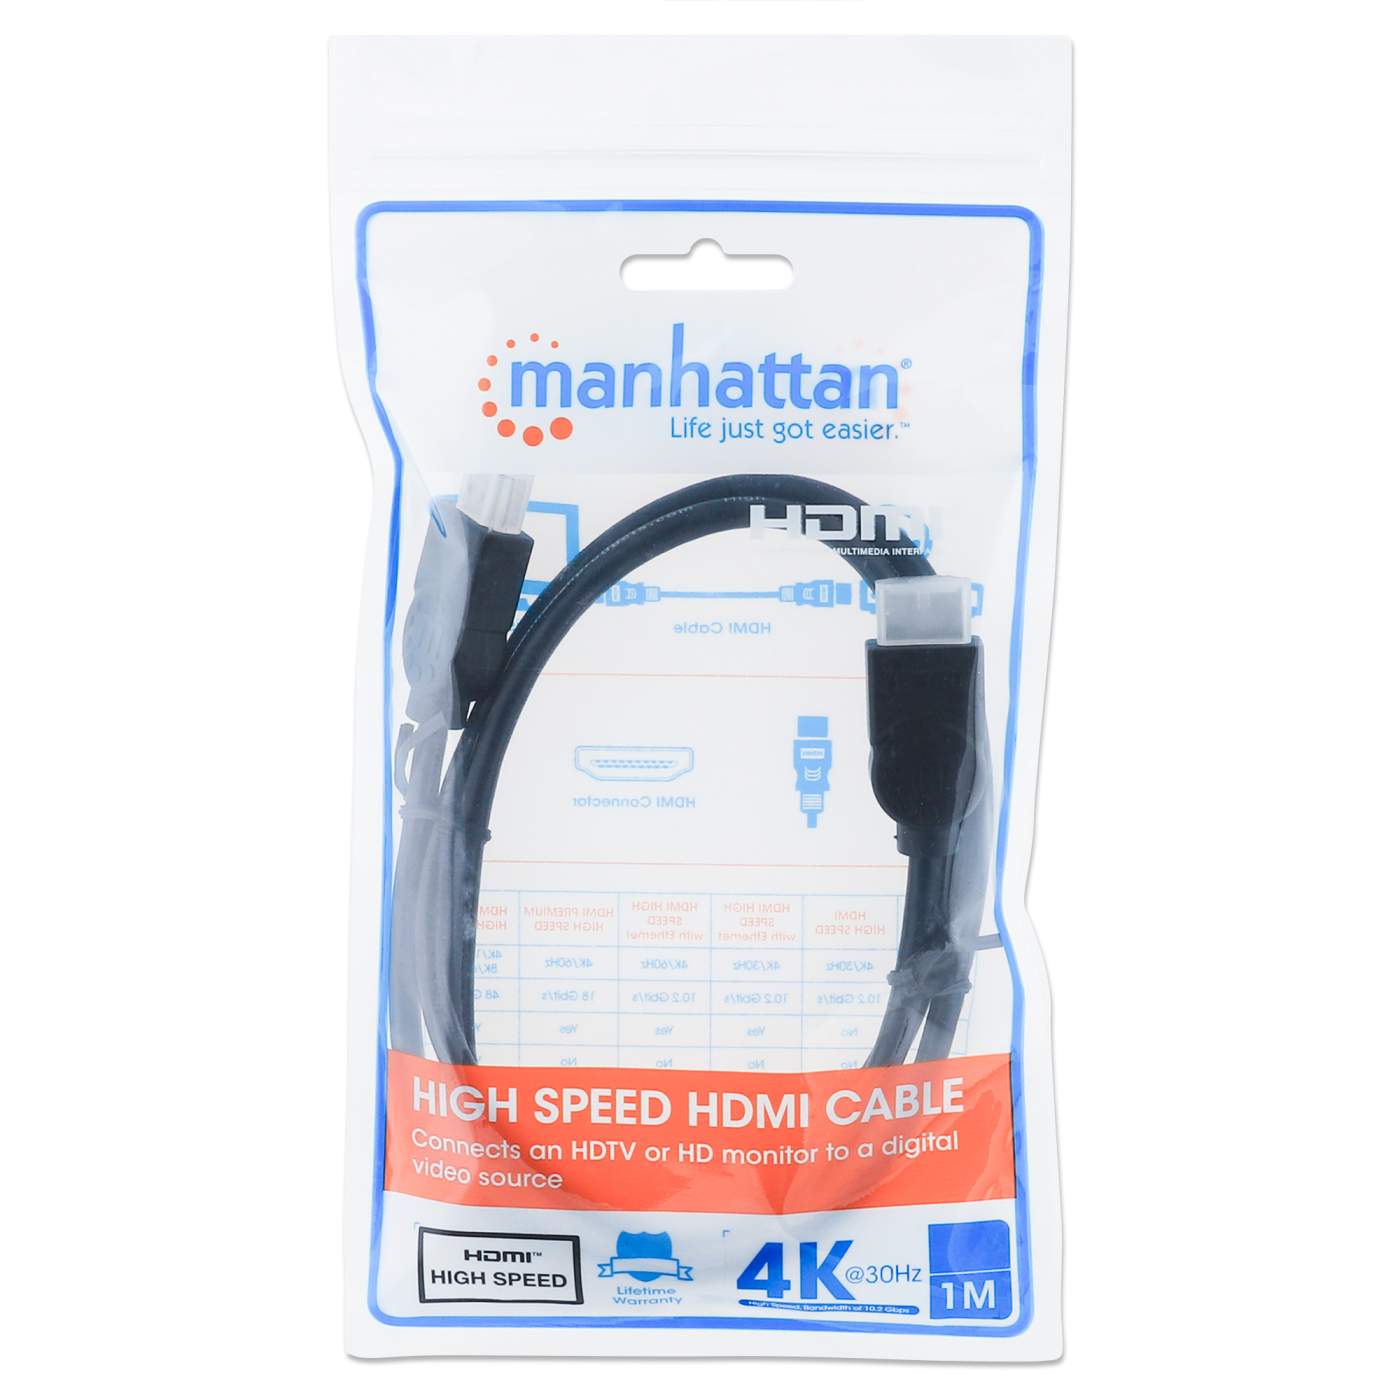 In-wall CL3 High Speed HDMI Cable w/ Ethernet (354486)